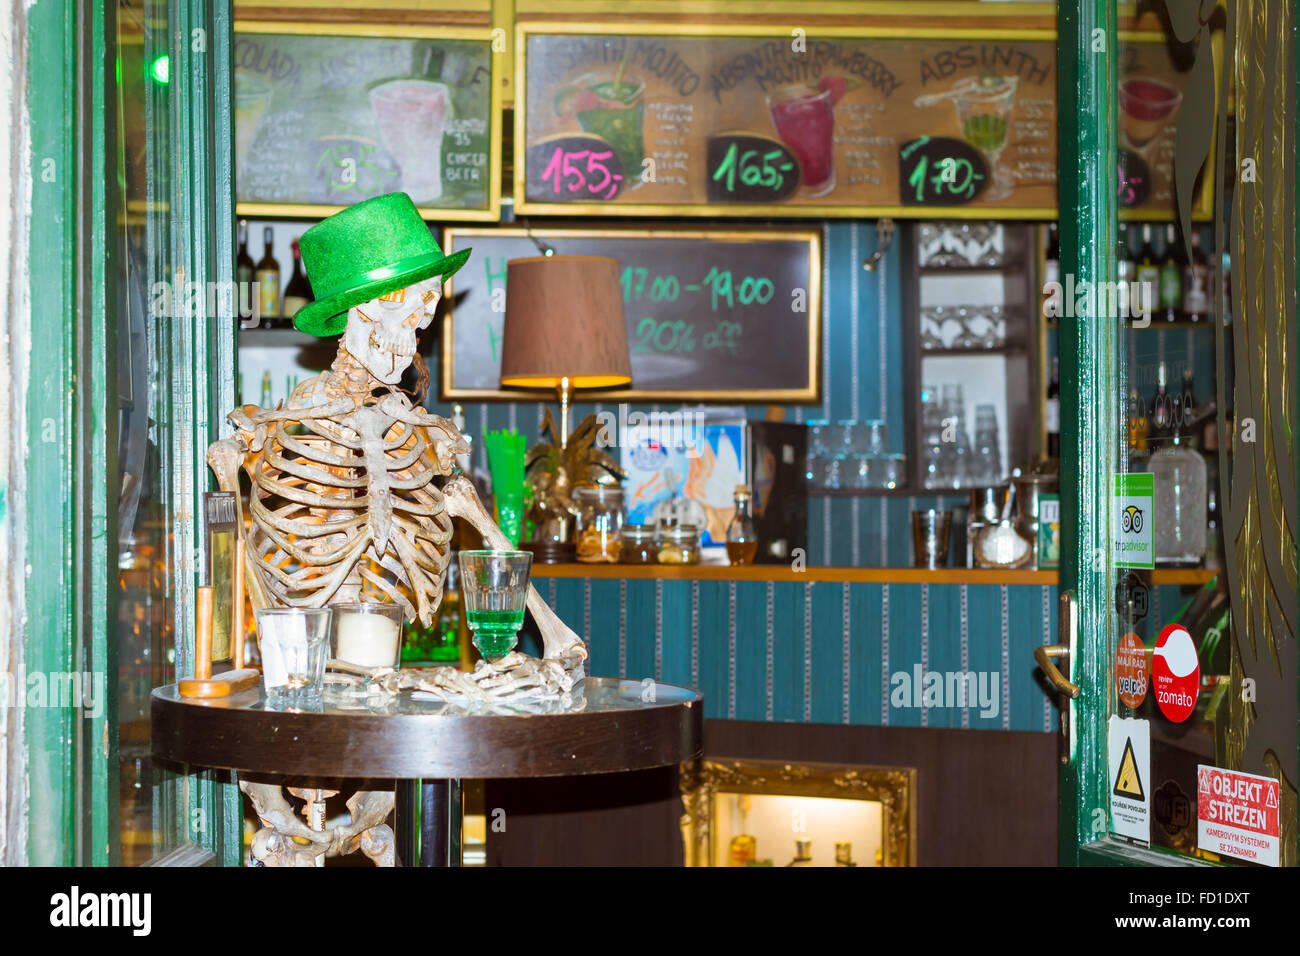 PRAGUE, CZECH REPUBLIC - AUGUST 27, 2015: The layout of a skeleton sitting at a table in the bar, Prague, Czech Republic Stock Photo